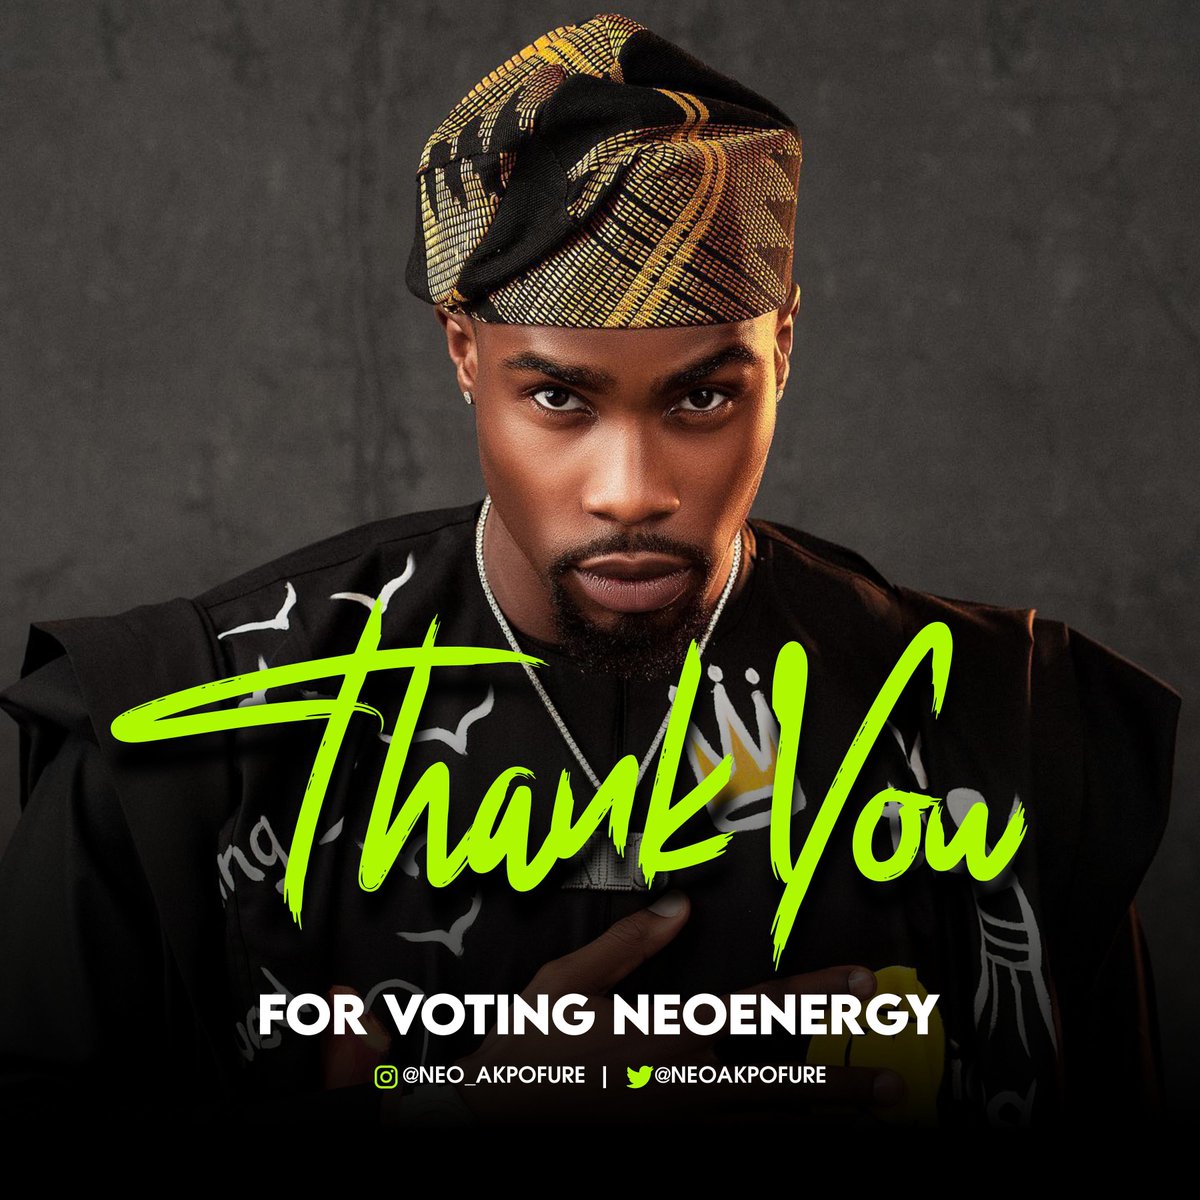 TheNeoTribe, odogwu silent movers fanbase, THANK YOU all so so much for voting #NeoEnergy and keeping him in the house, we didn’t even smell bottom three 
We weathered all the storms and stood strong regardless and I’m proud to call you family 🫶🏽🧨🧨💚

NEO MAN ON FIRE…